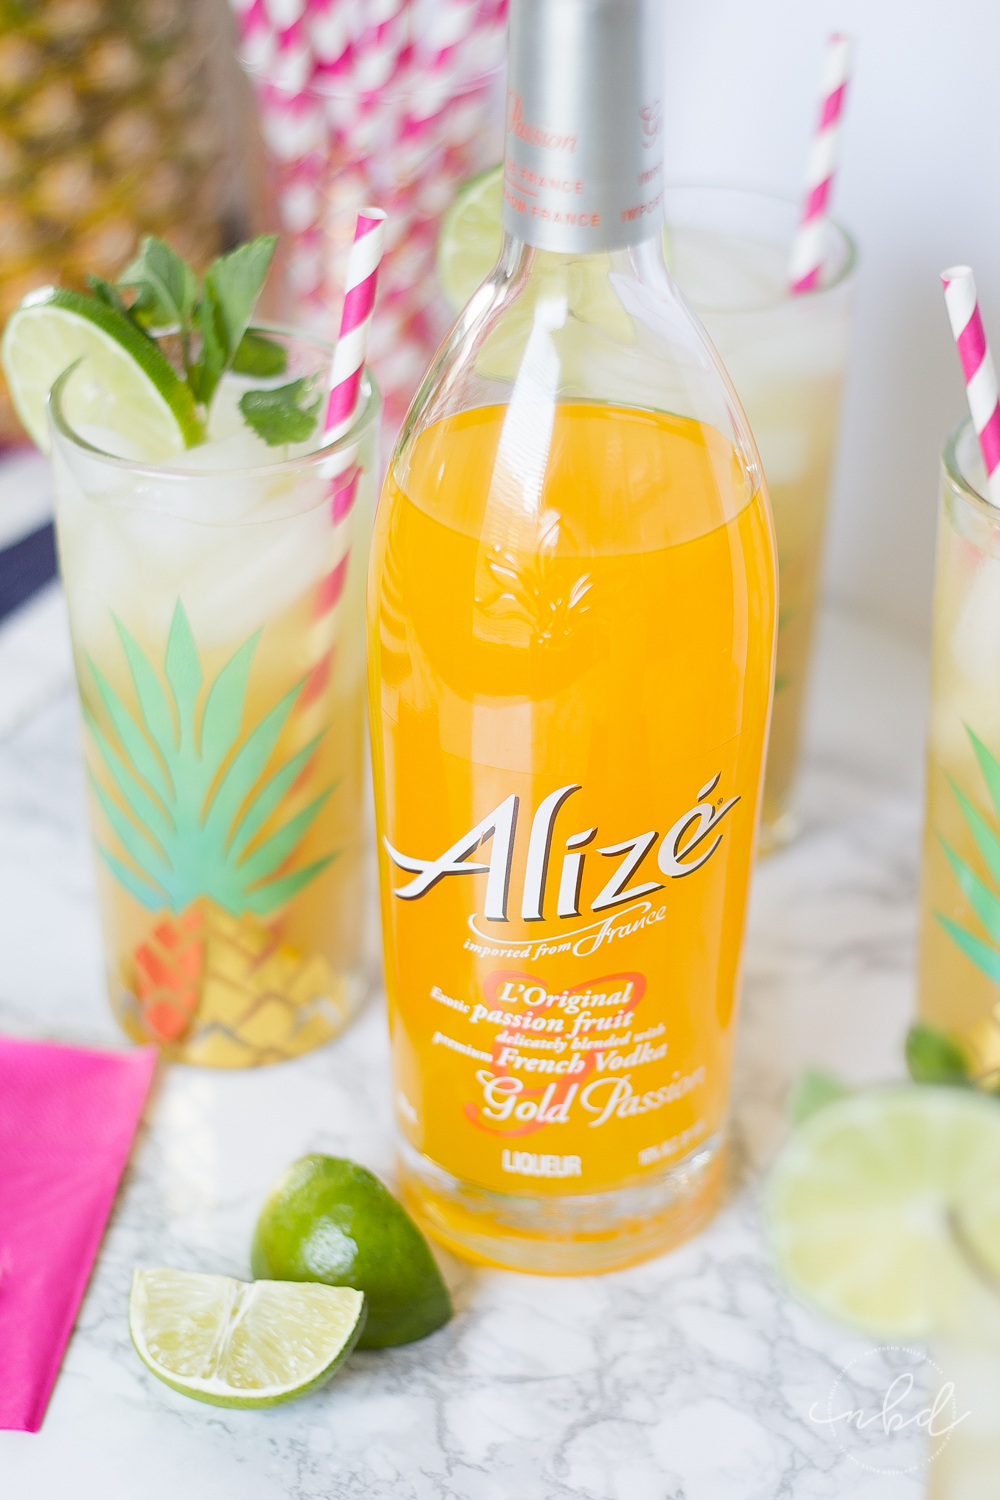 Gold Pineapple Passion Fever cocktail recipe with Alize Passion Gold